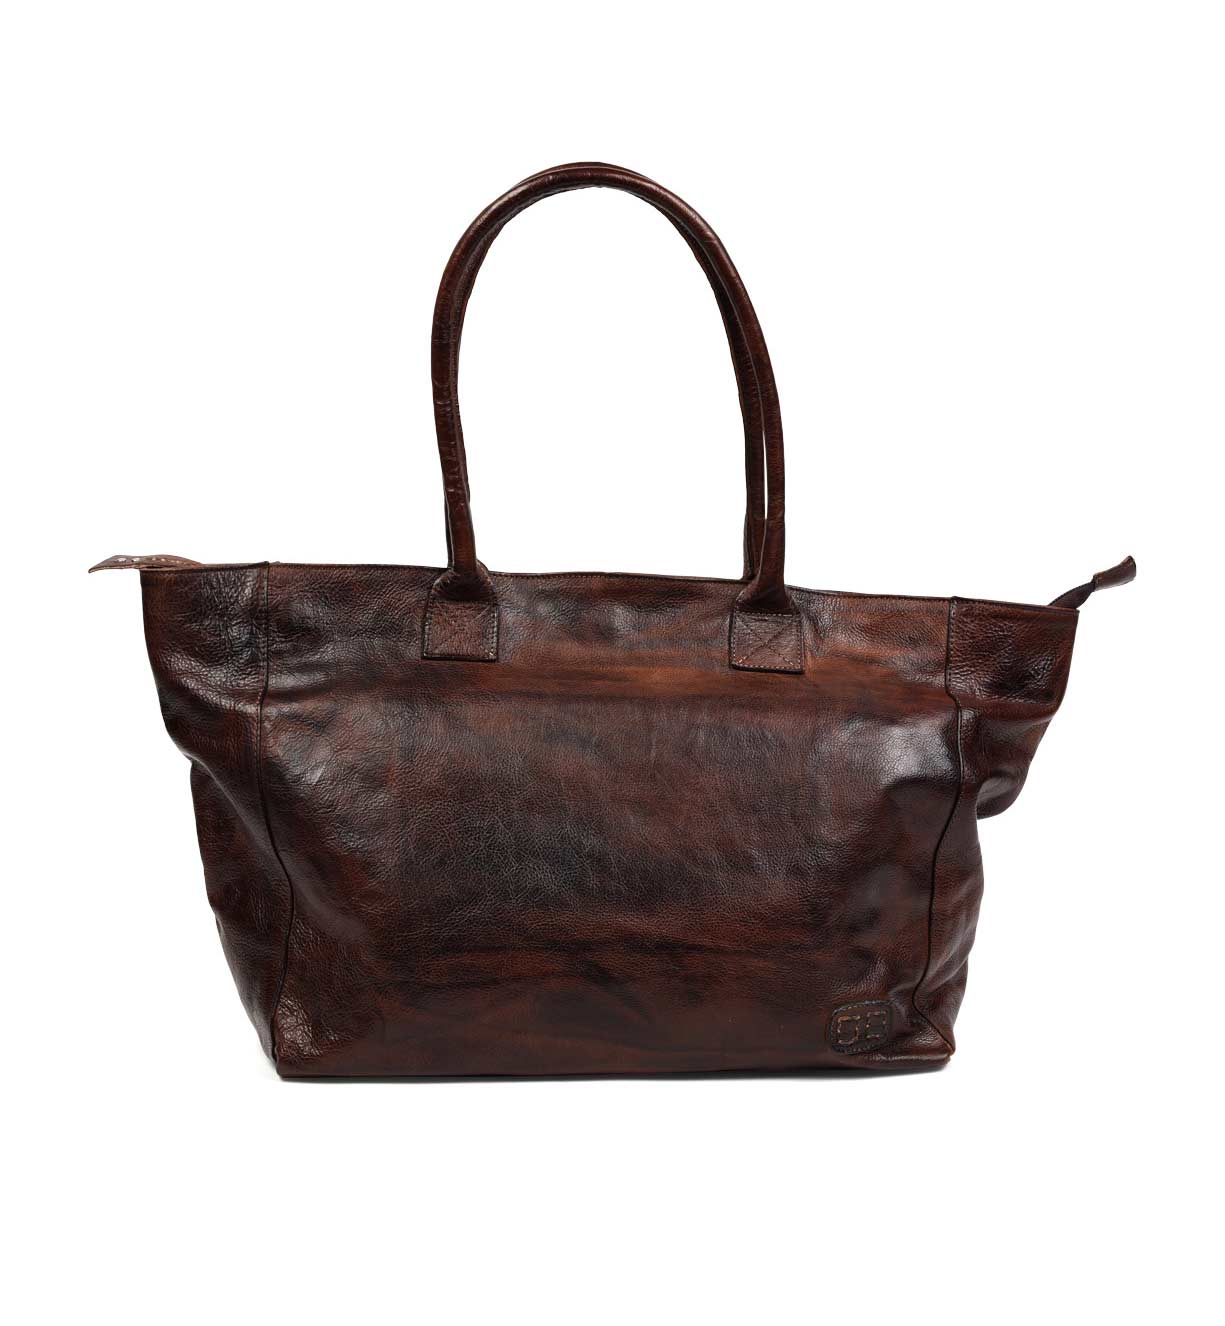 The Cersei brown leather tote bag by Bed Stu.